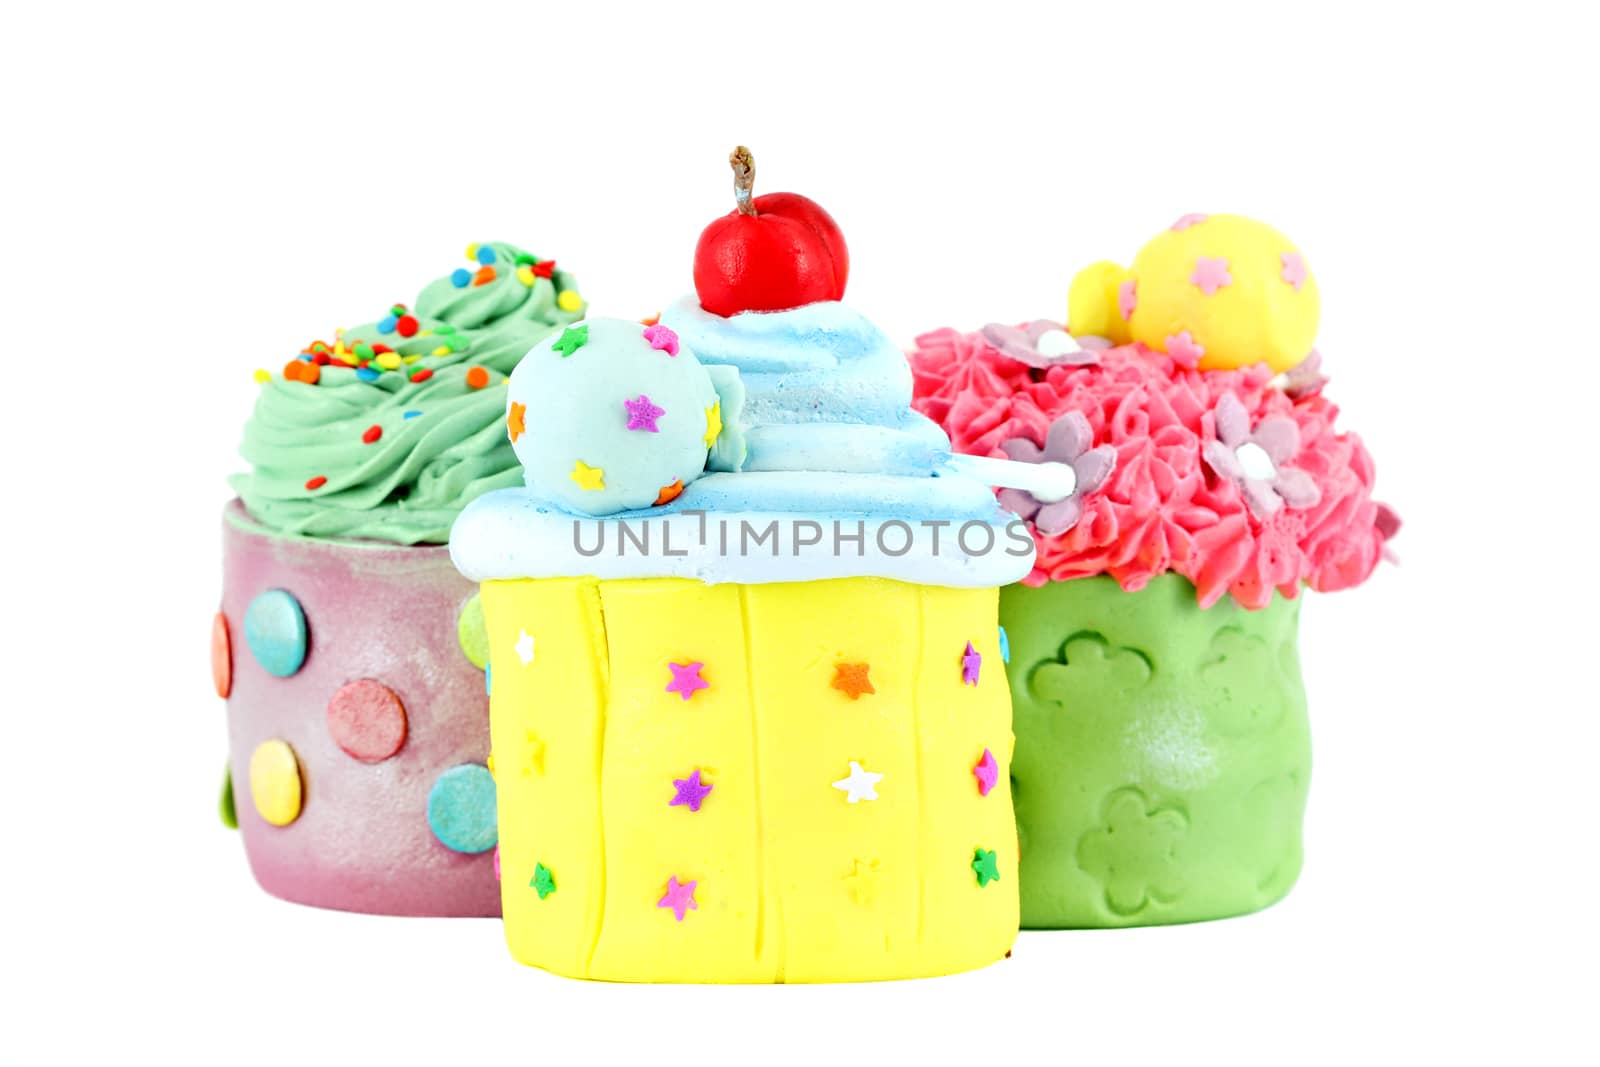 sweet cupcakes on white background by goce